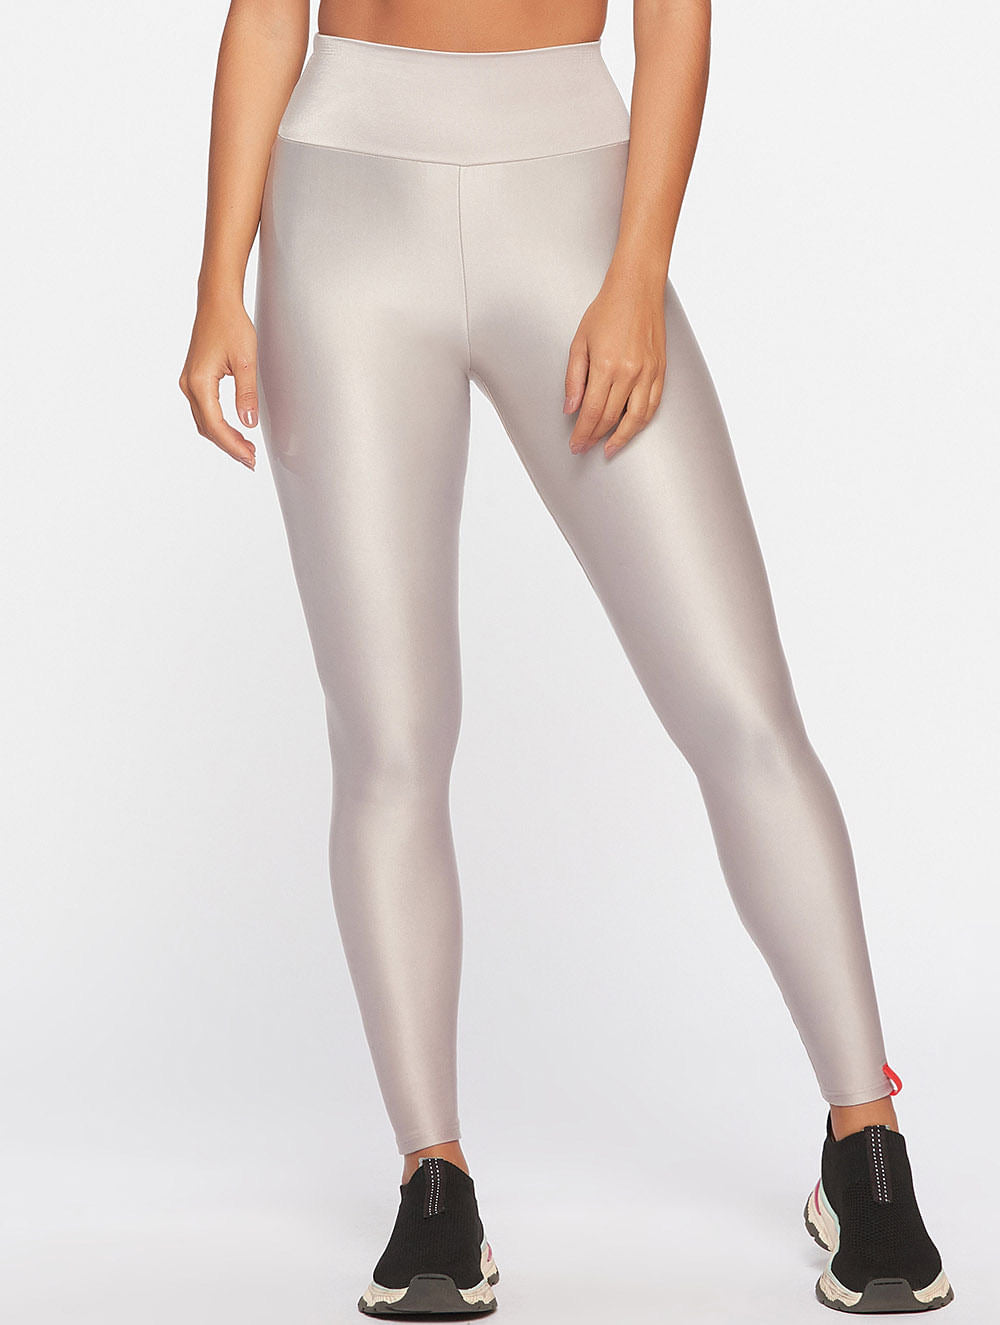 Leggings Energy Body For Sure – Mineral Fashion Store